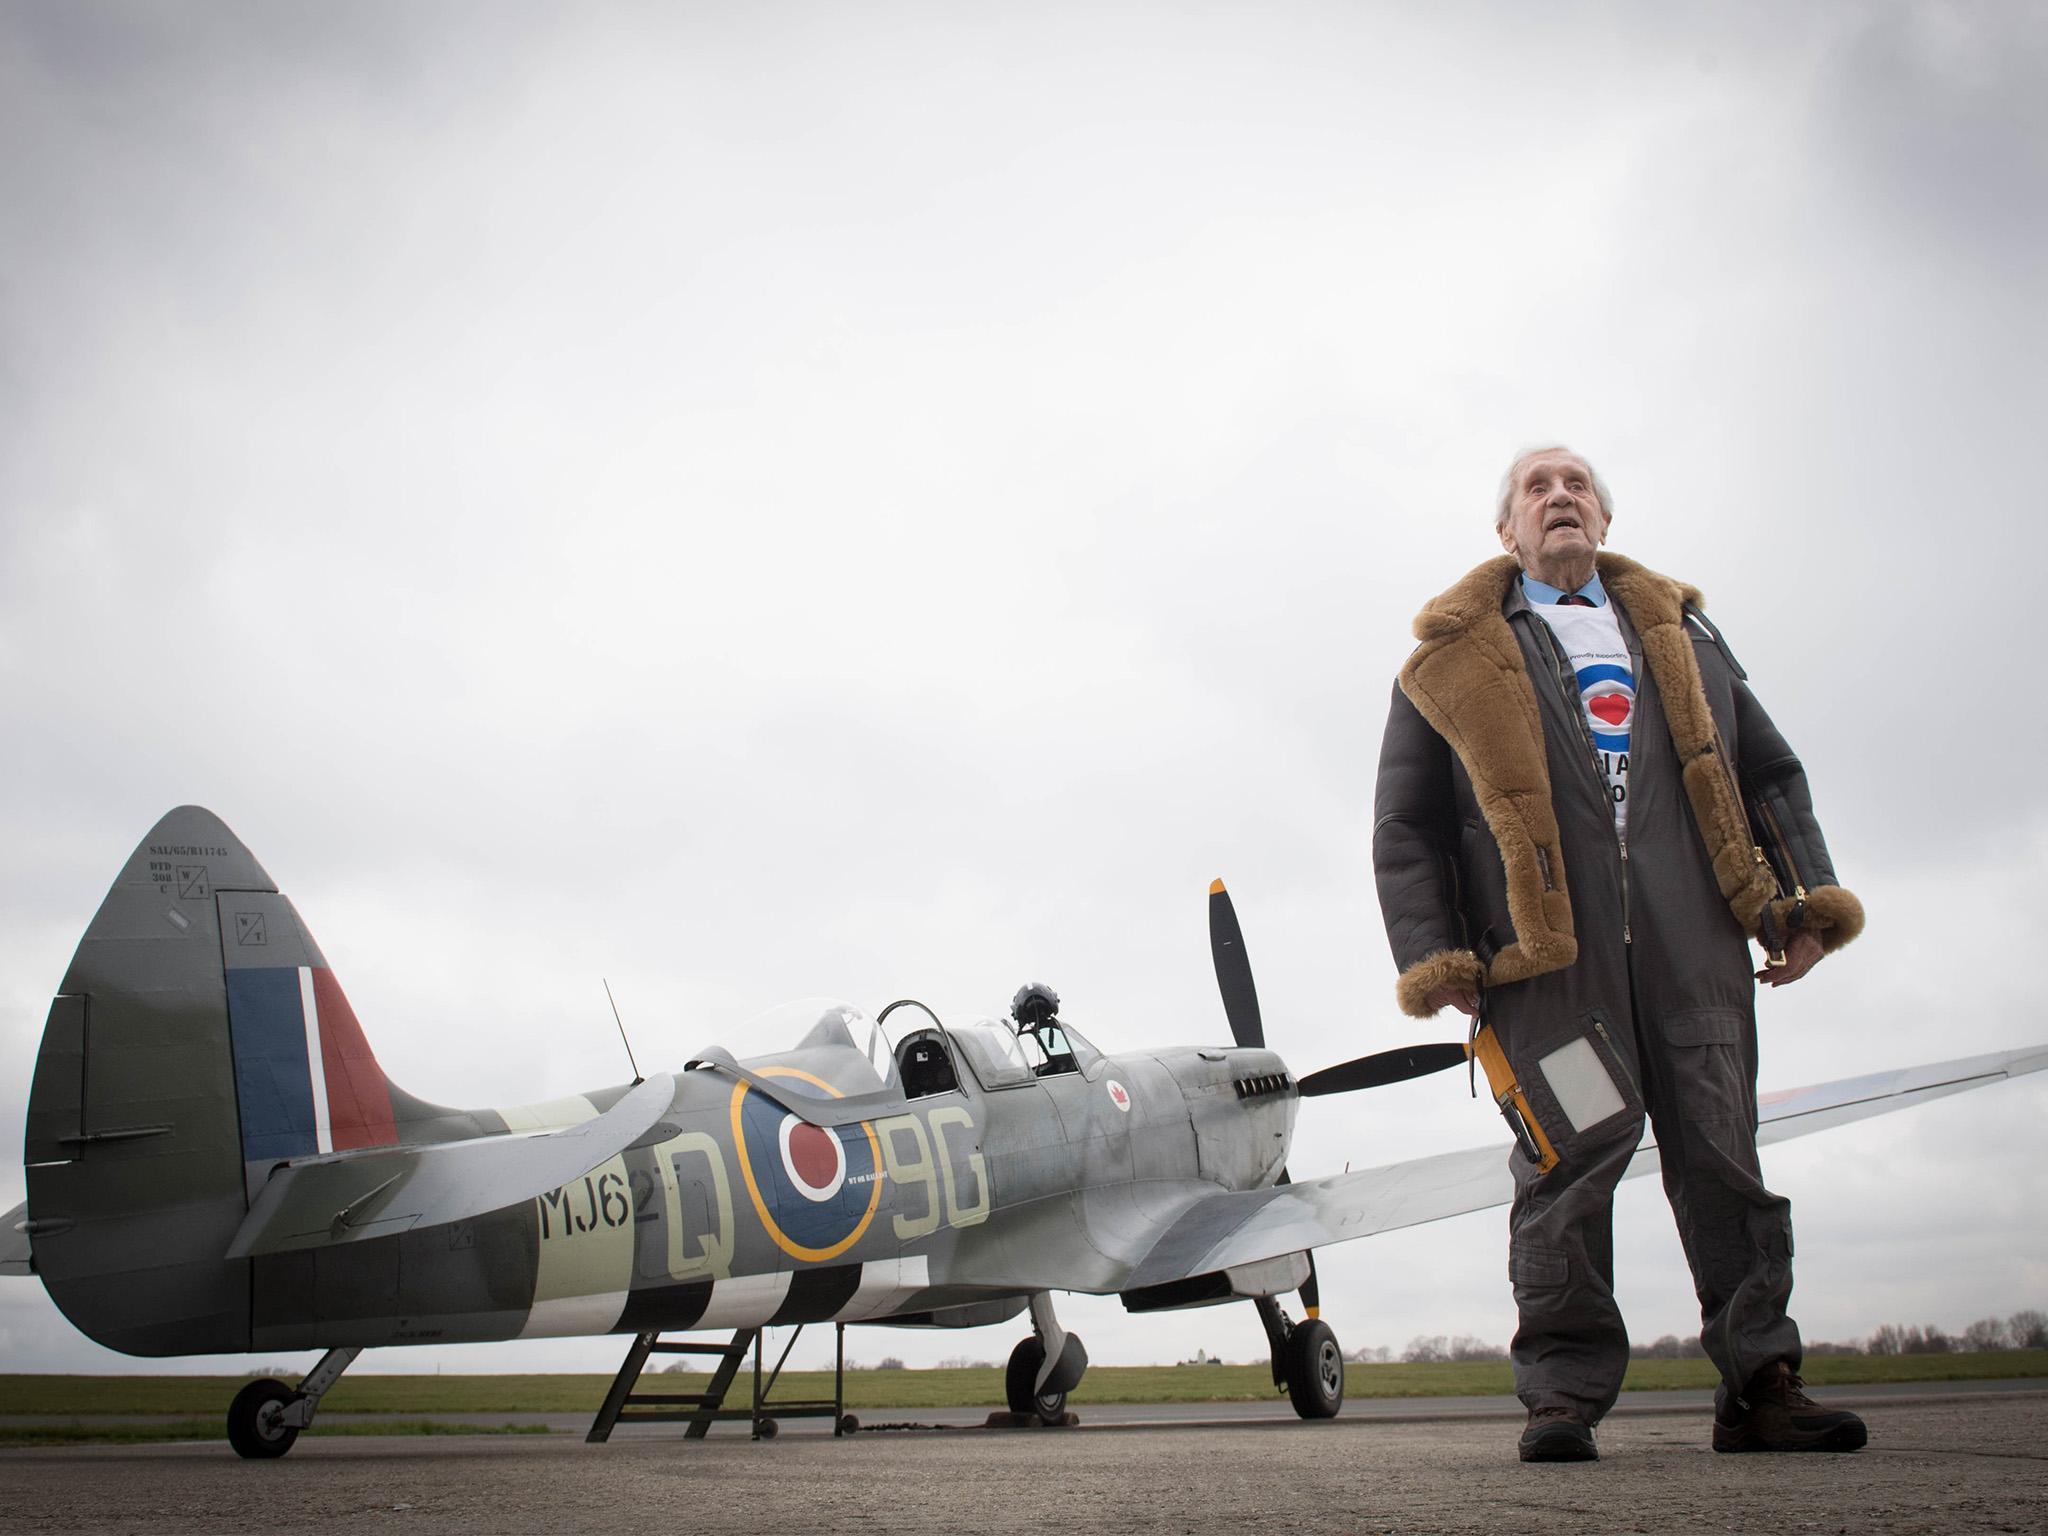 Former Spitfire pilot Squadron Leader Allan Scott, 96, prepares to fly in a Spitfire for the RAF centenary